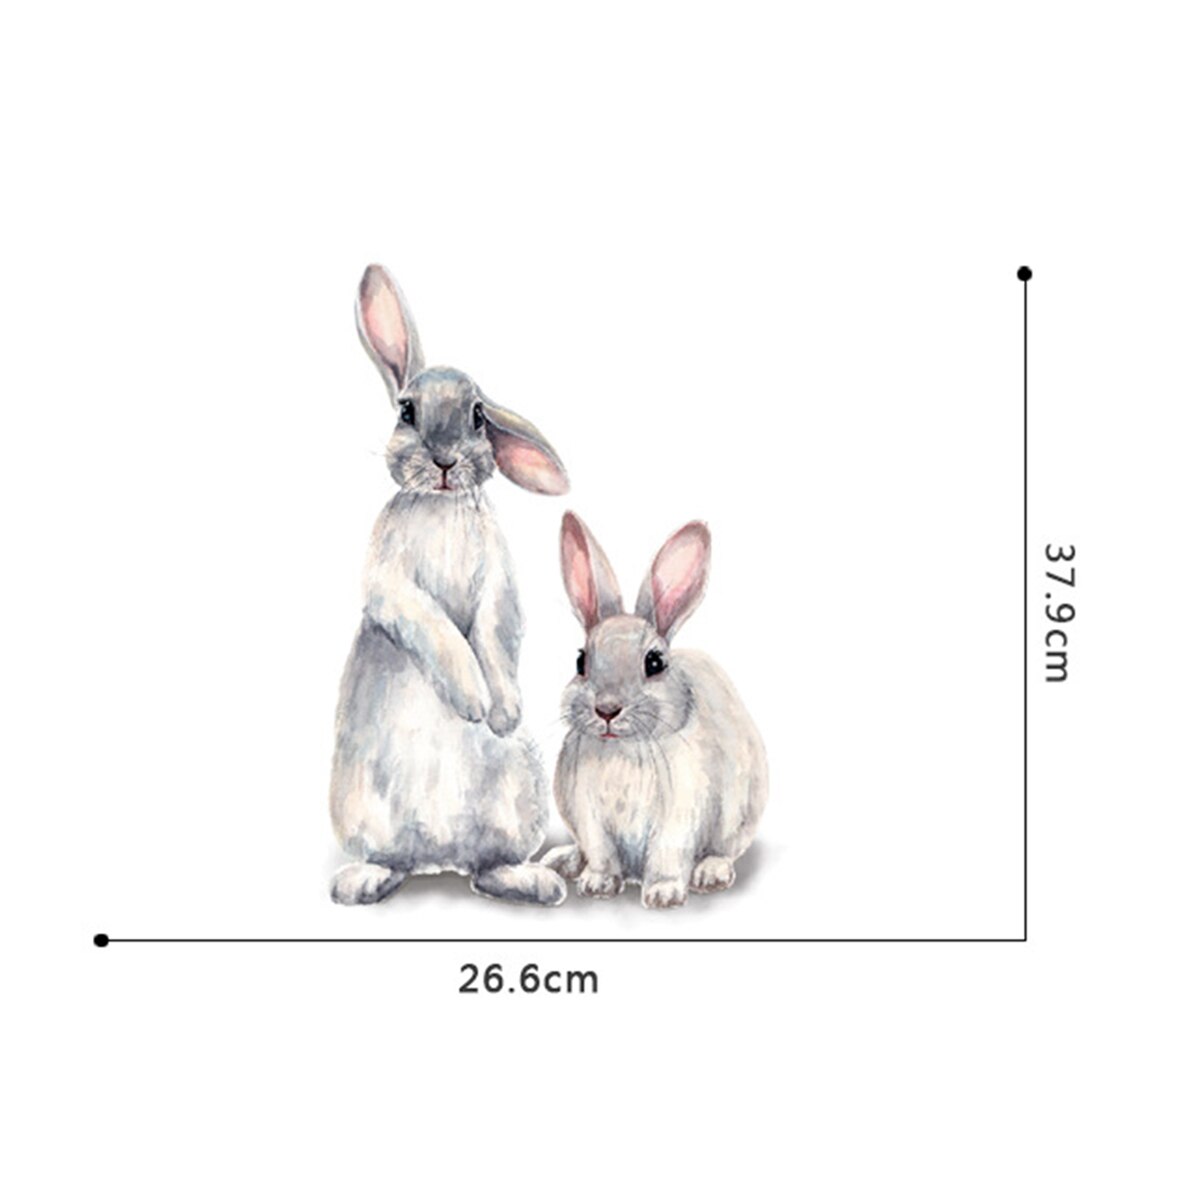 Two cute rabbits Wall sticker Children's kids room home decoration removable wallpaper living room bedroom mural bunny stickers